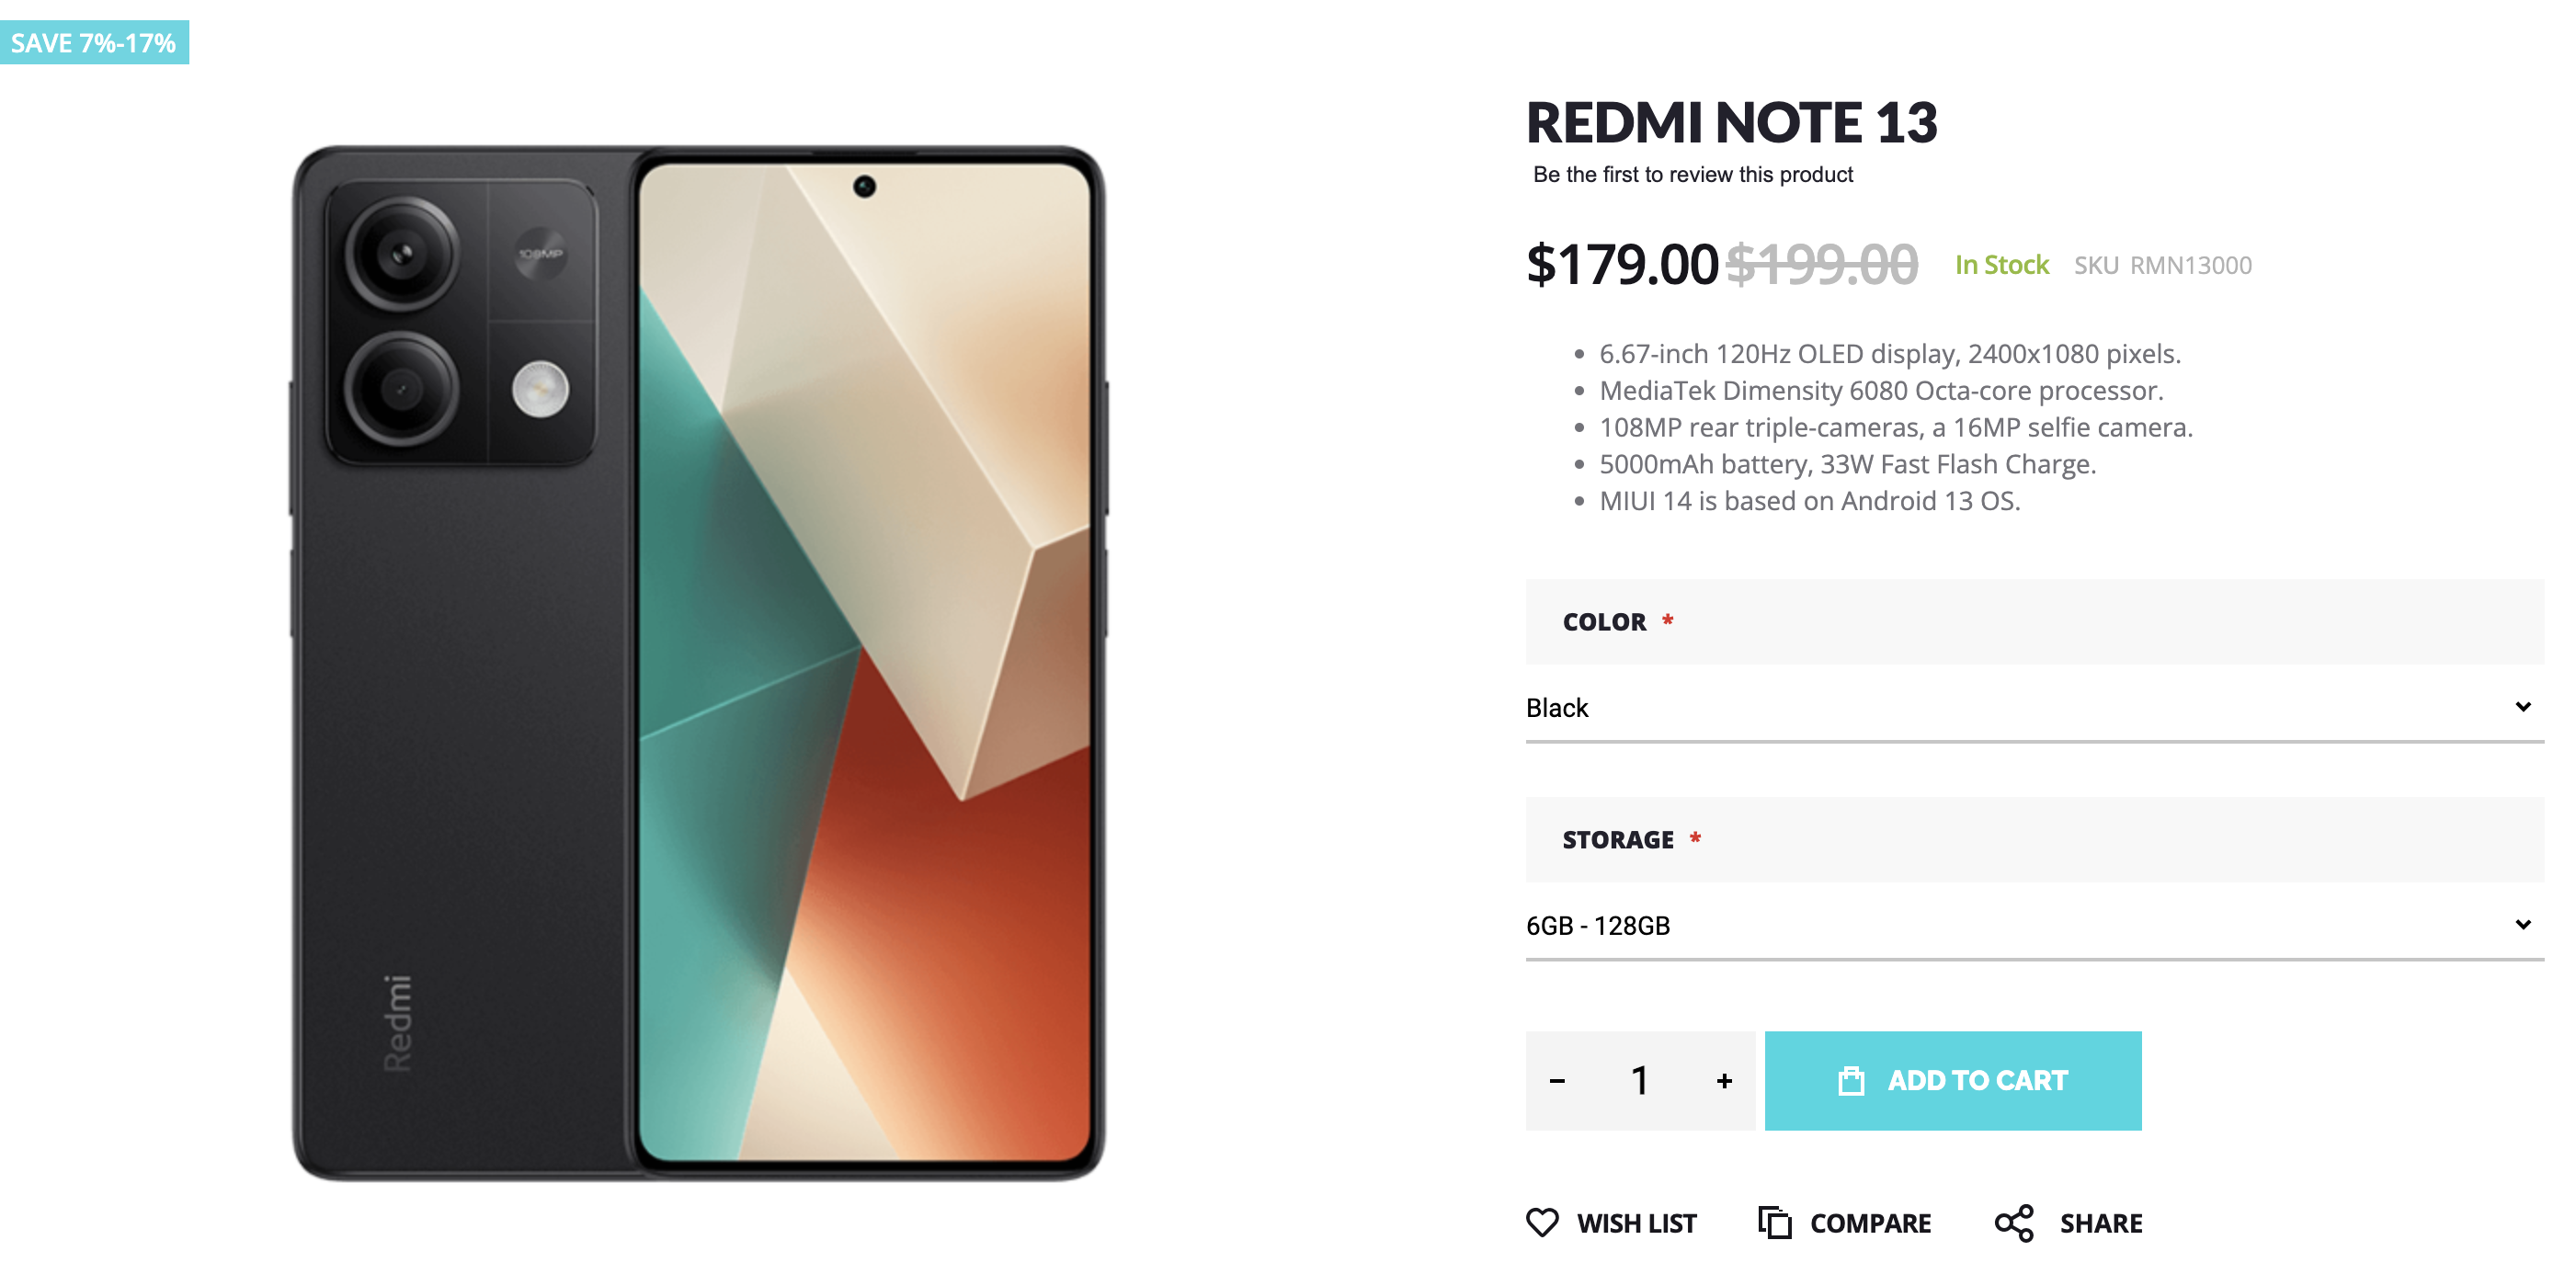 Redmi Note 13 is available now at the Giztop store